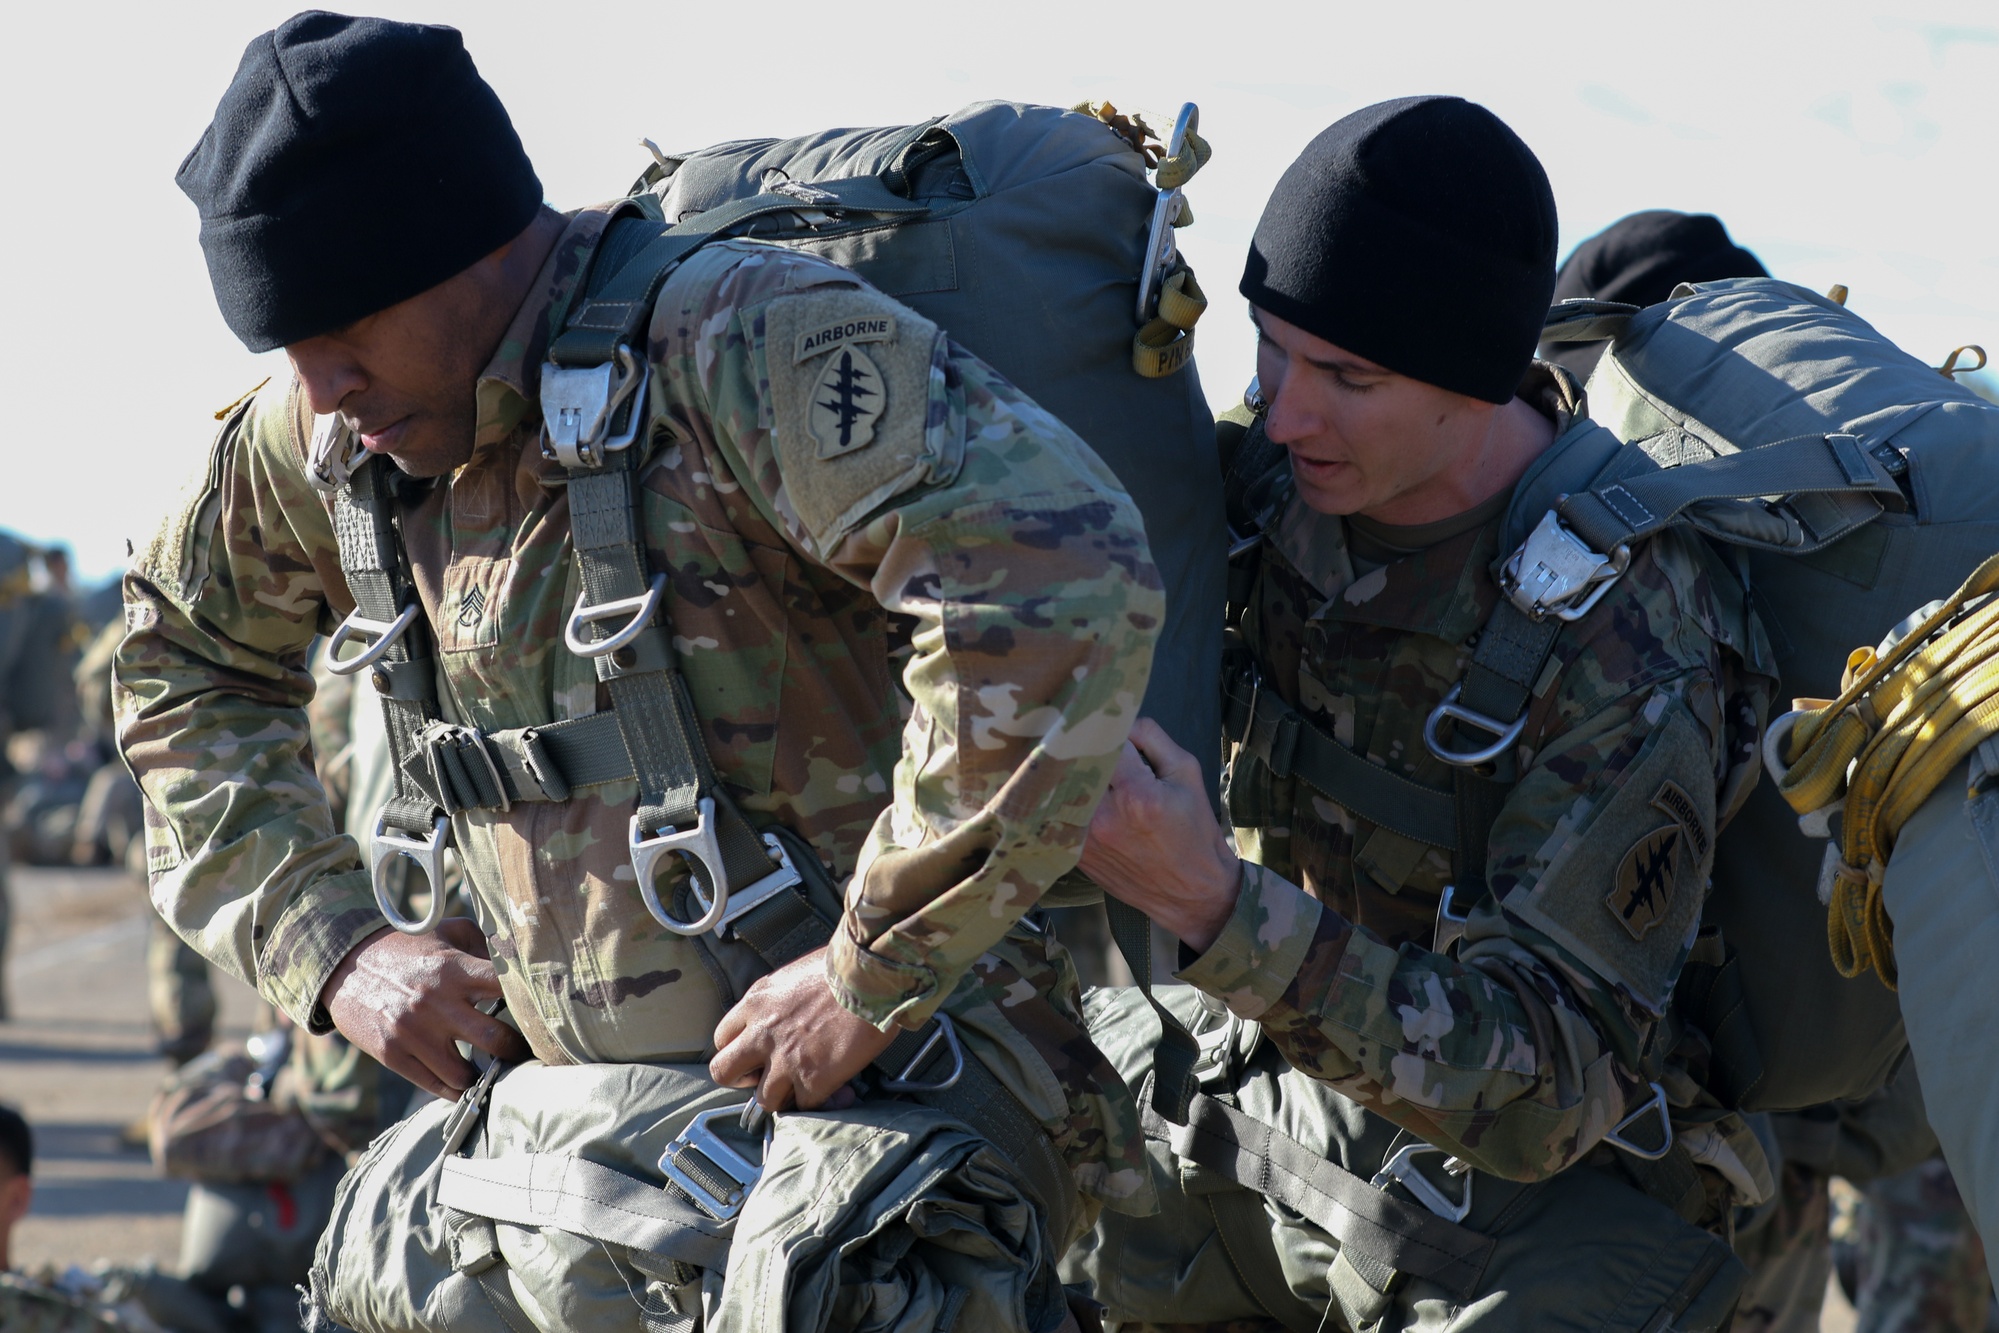 DVIDS - News - Mobile sniper team graduates 24 new 82nd Airborne snipers